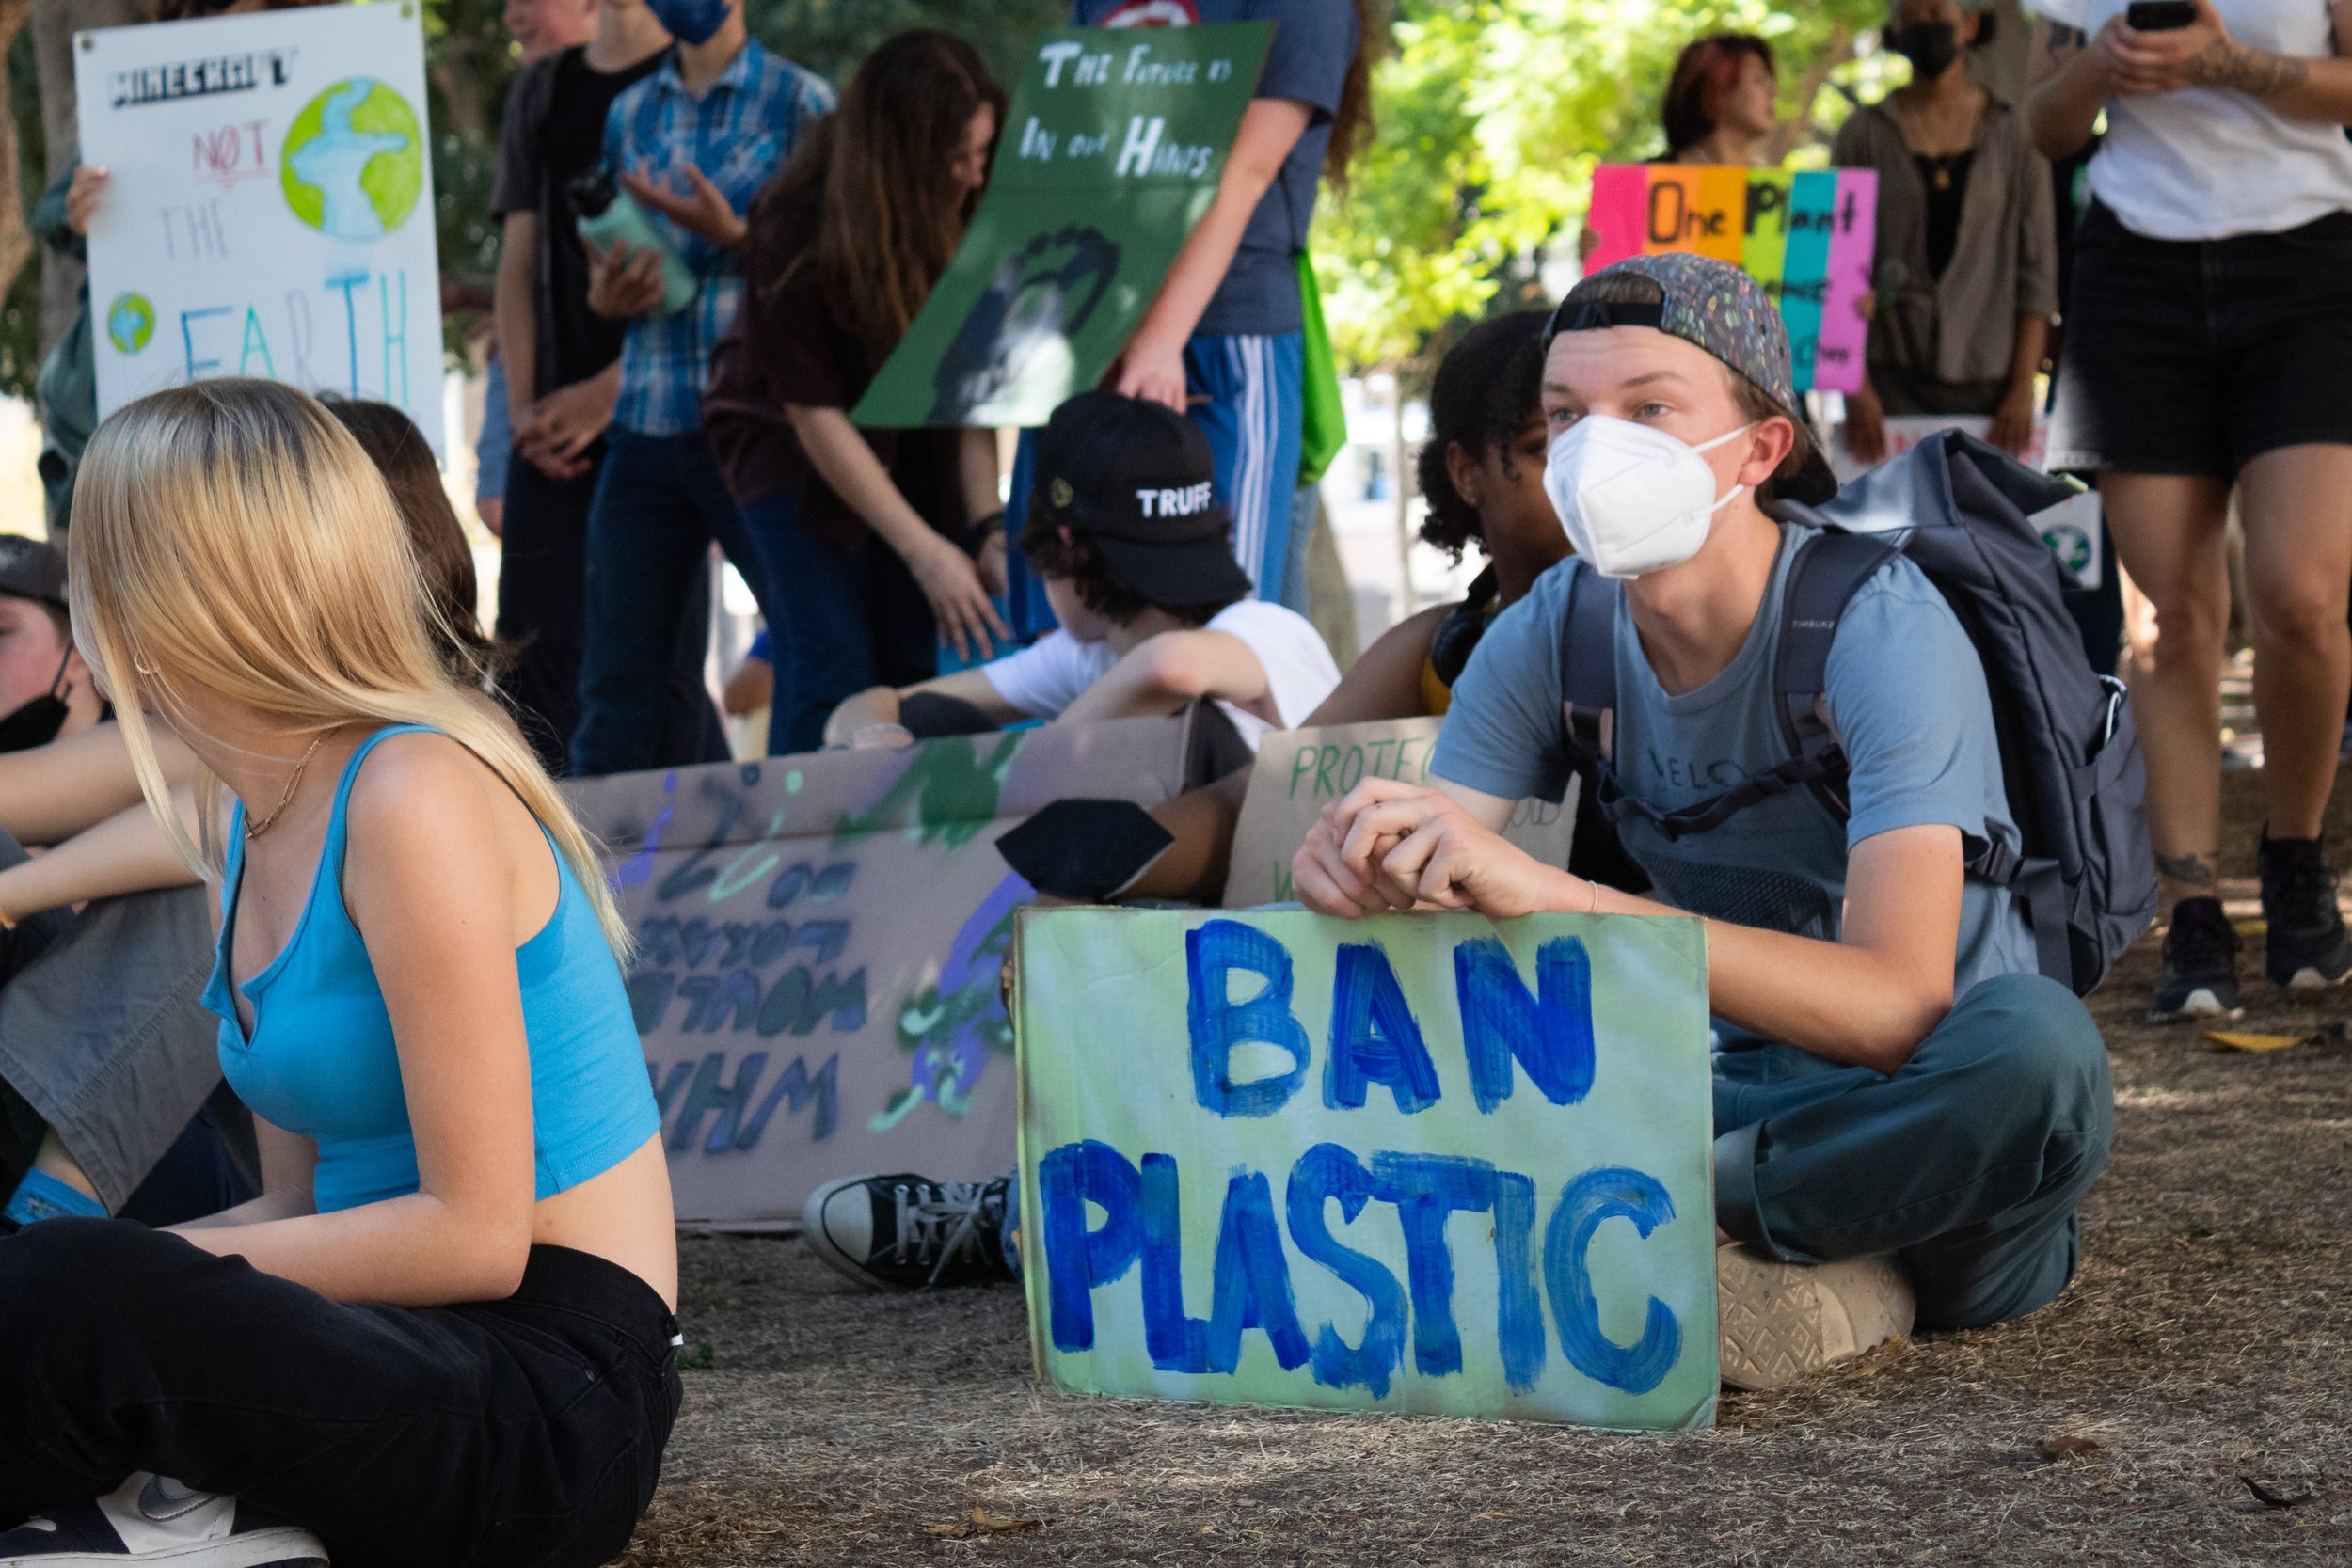  Odinn Thordarson, 17, at the Youth Climate Strike at the Los Angeles City Hall with a sign that says "ban plastic." Odinn is a senior at Sequoyah High School and came as part of the Social Invitation Program (SIT) through the school. Los Angeles Cit